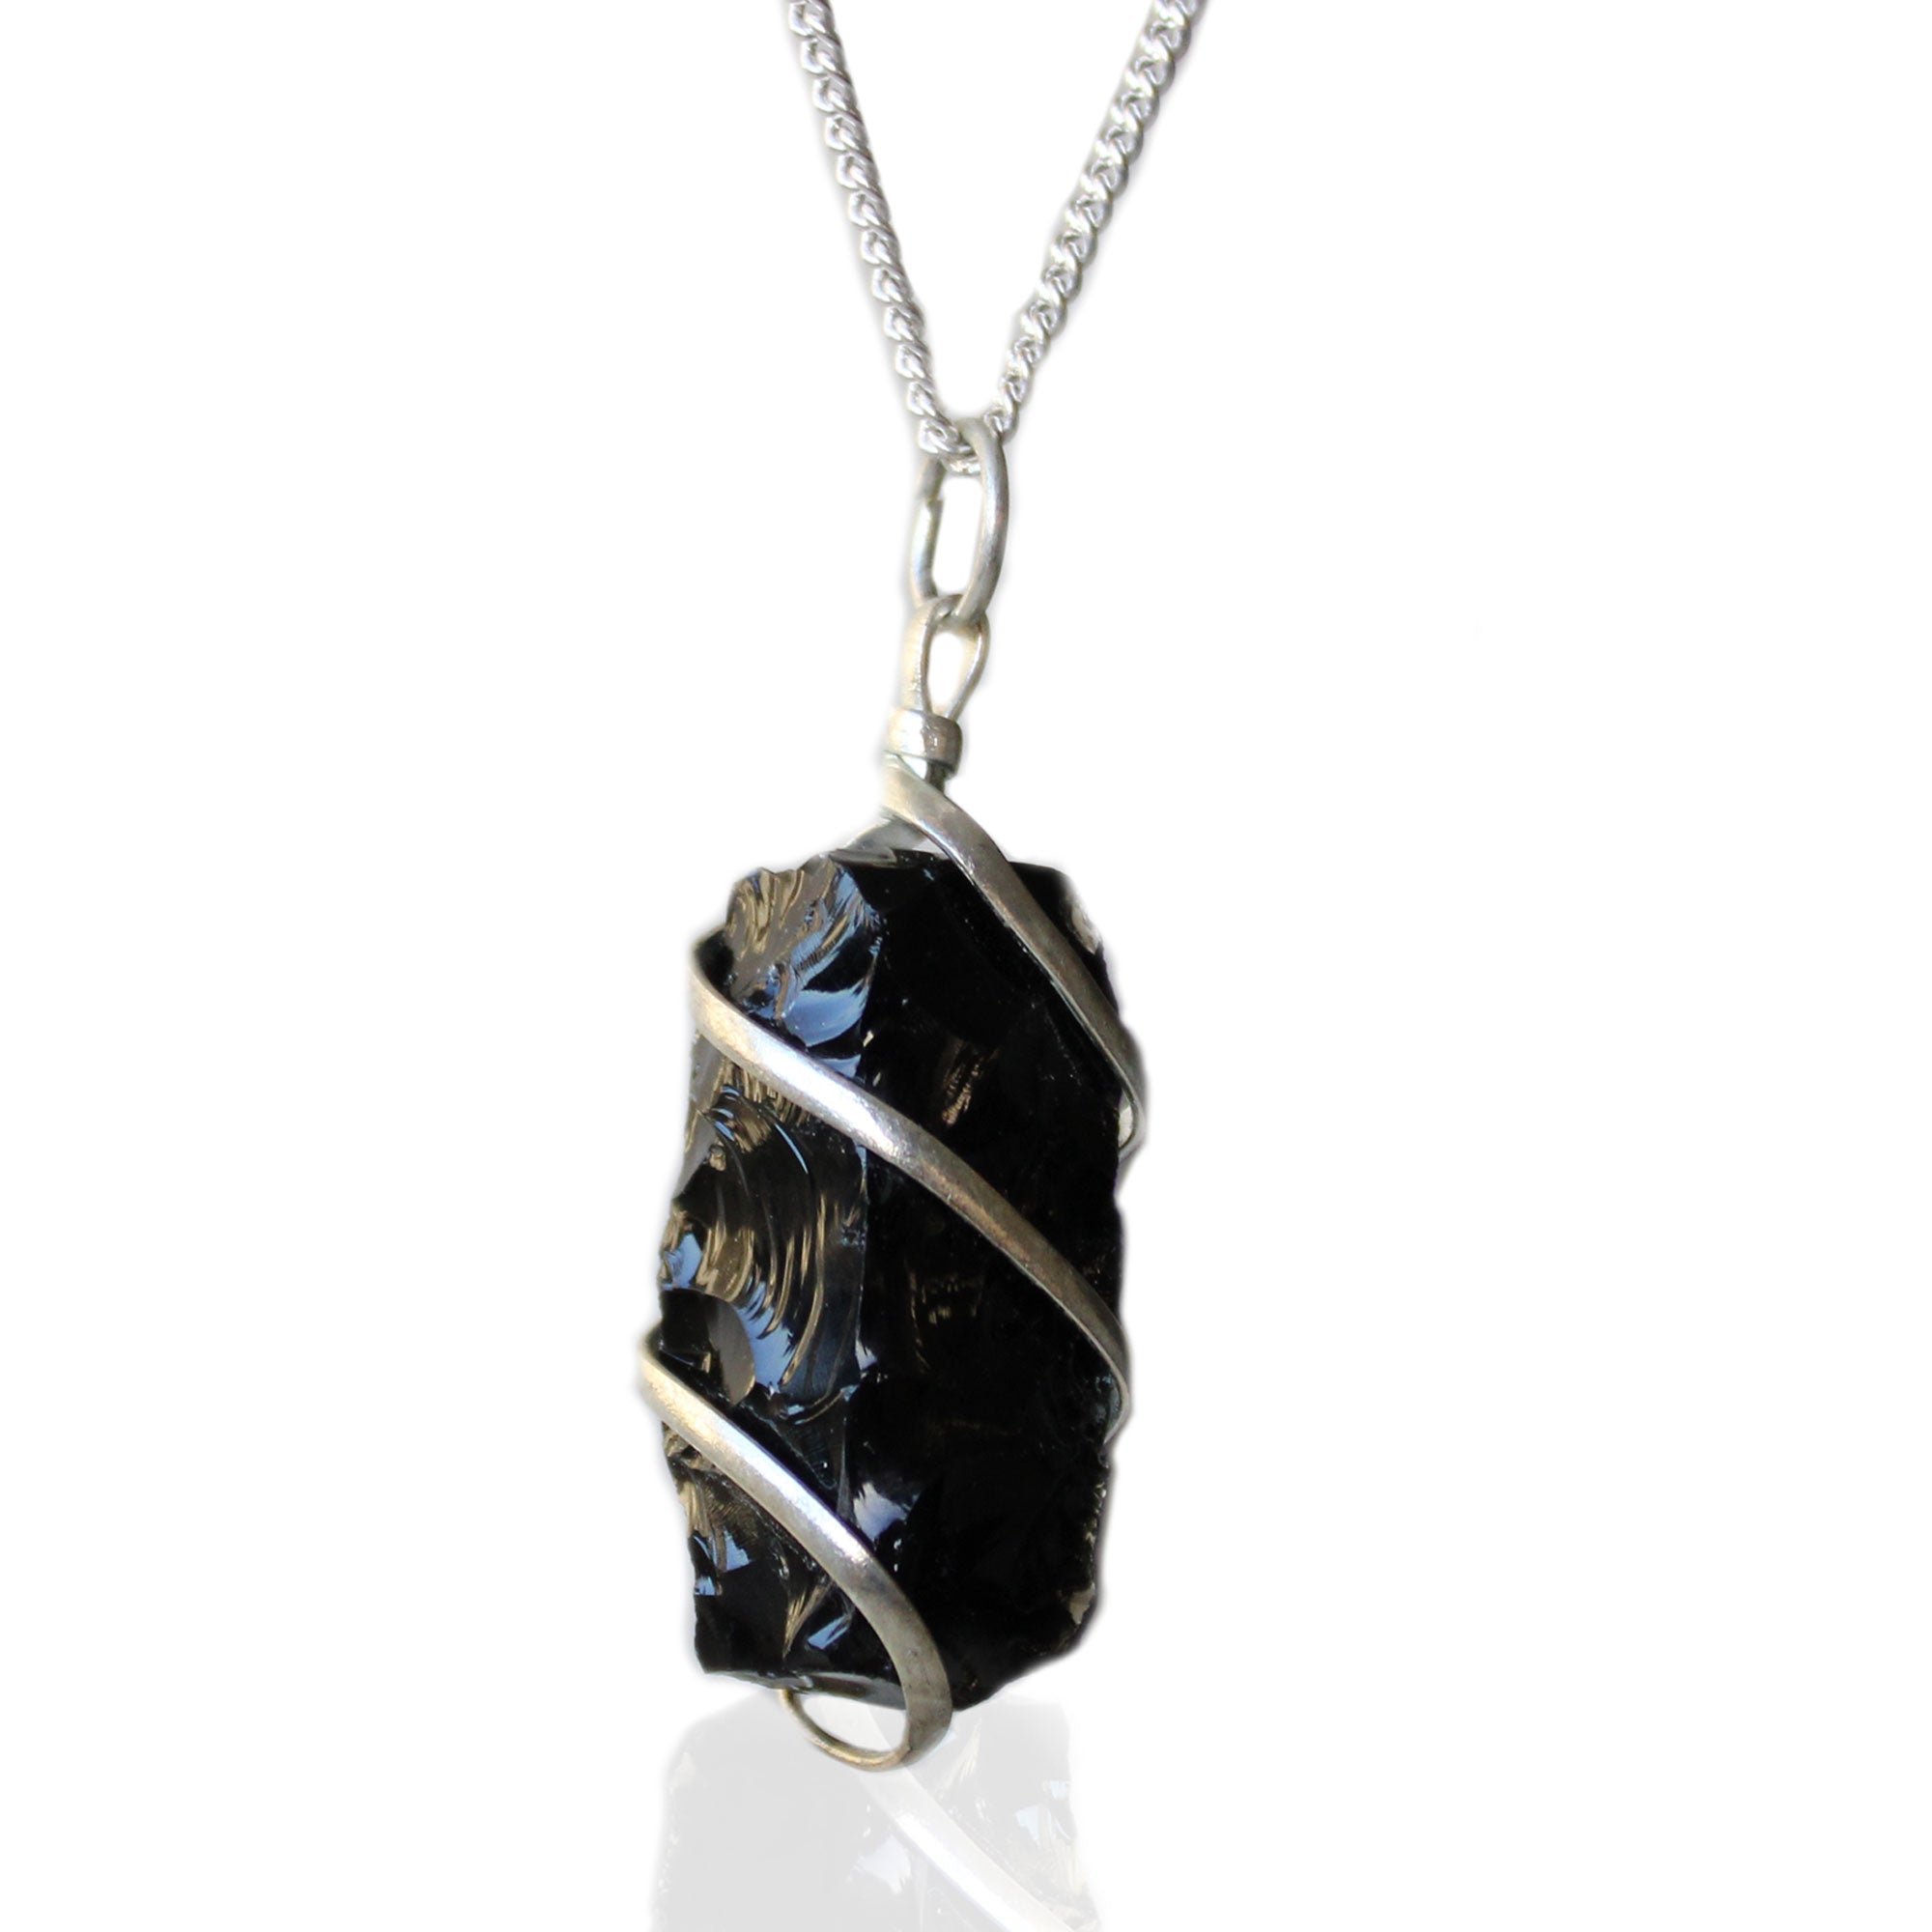 View Cascade Wrapped Gemstone Necklace Rough Black Onyx information